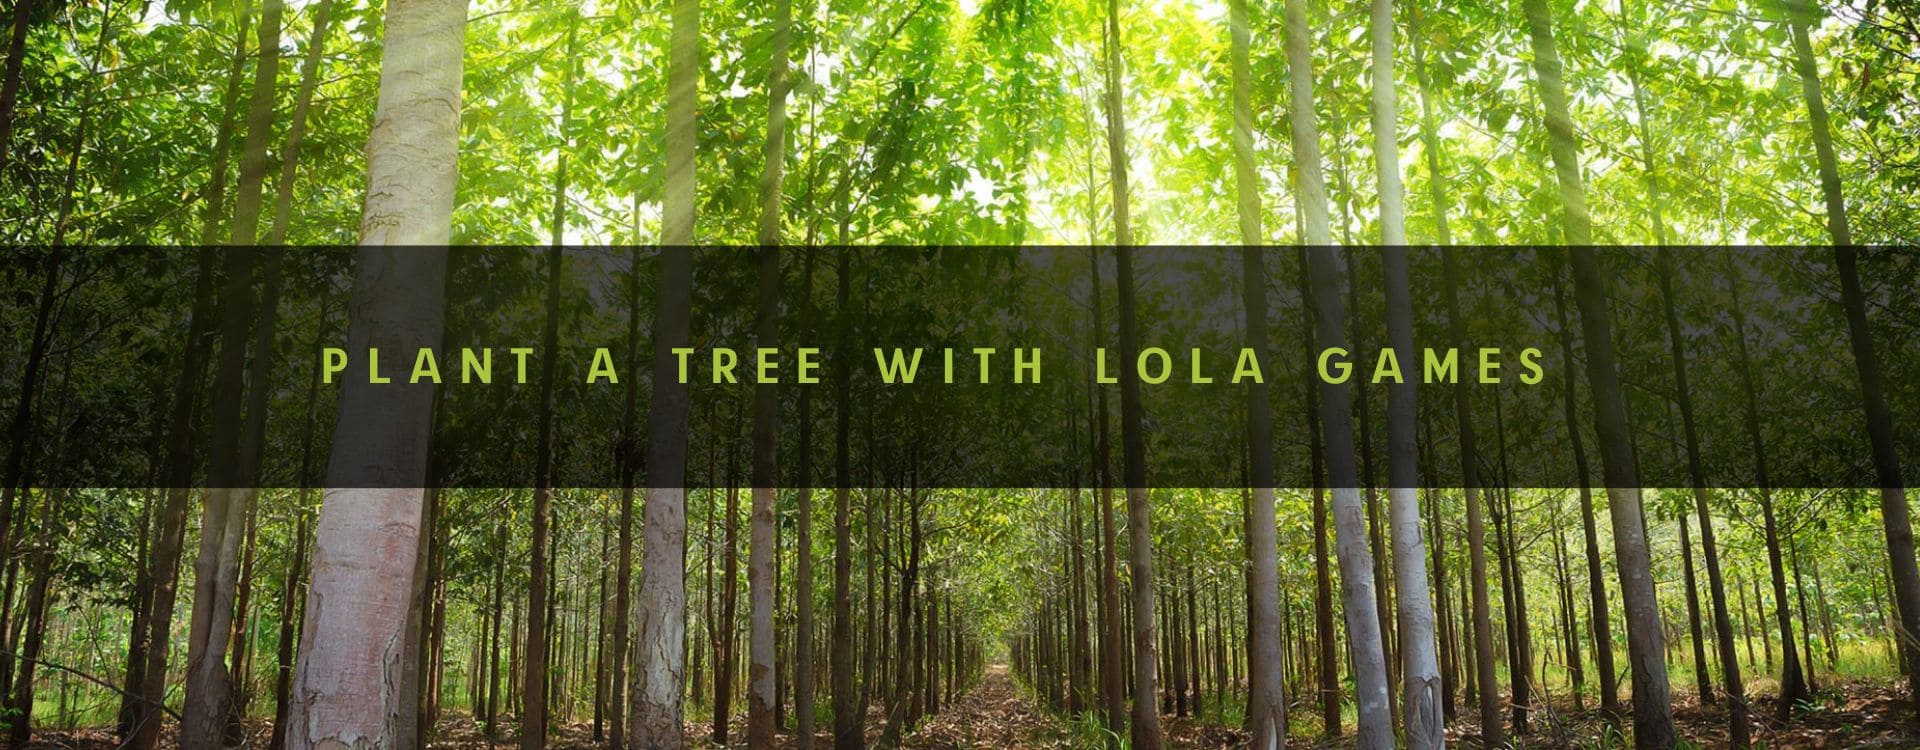 plant_a_tree_with_lola_games.jpg